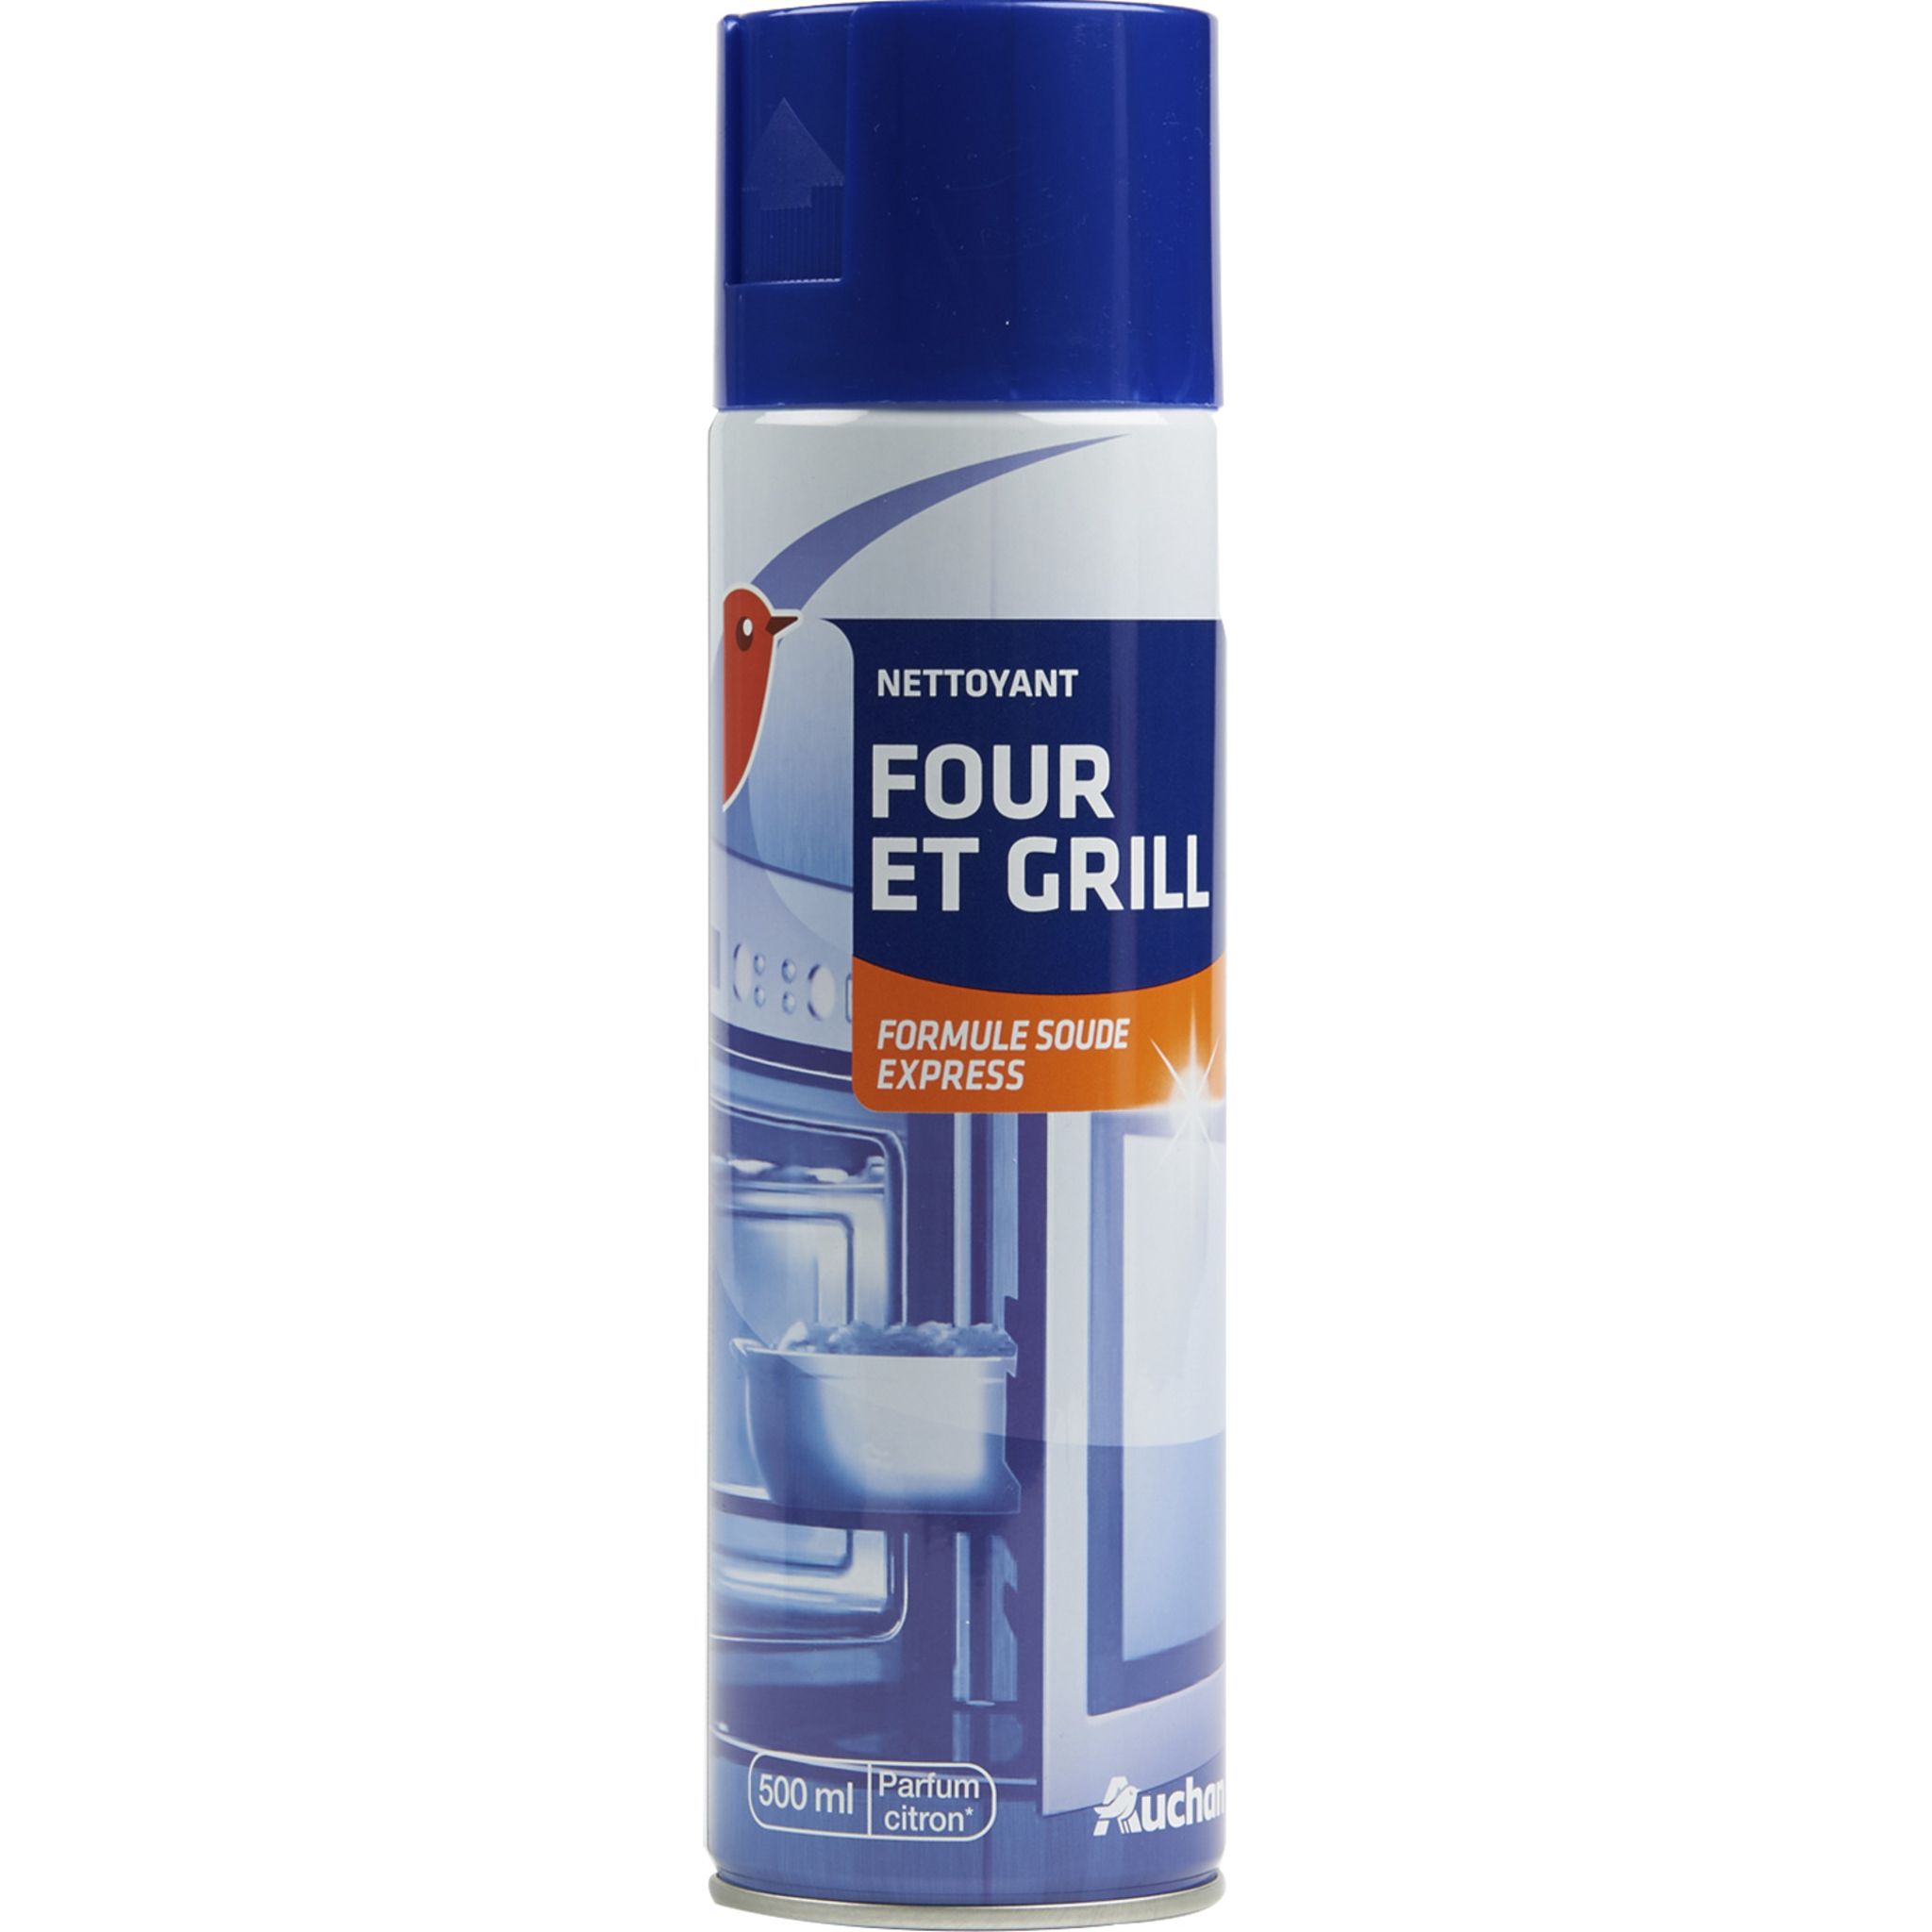 HG nettoyant four. grill & barbecue - 500ml